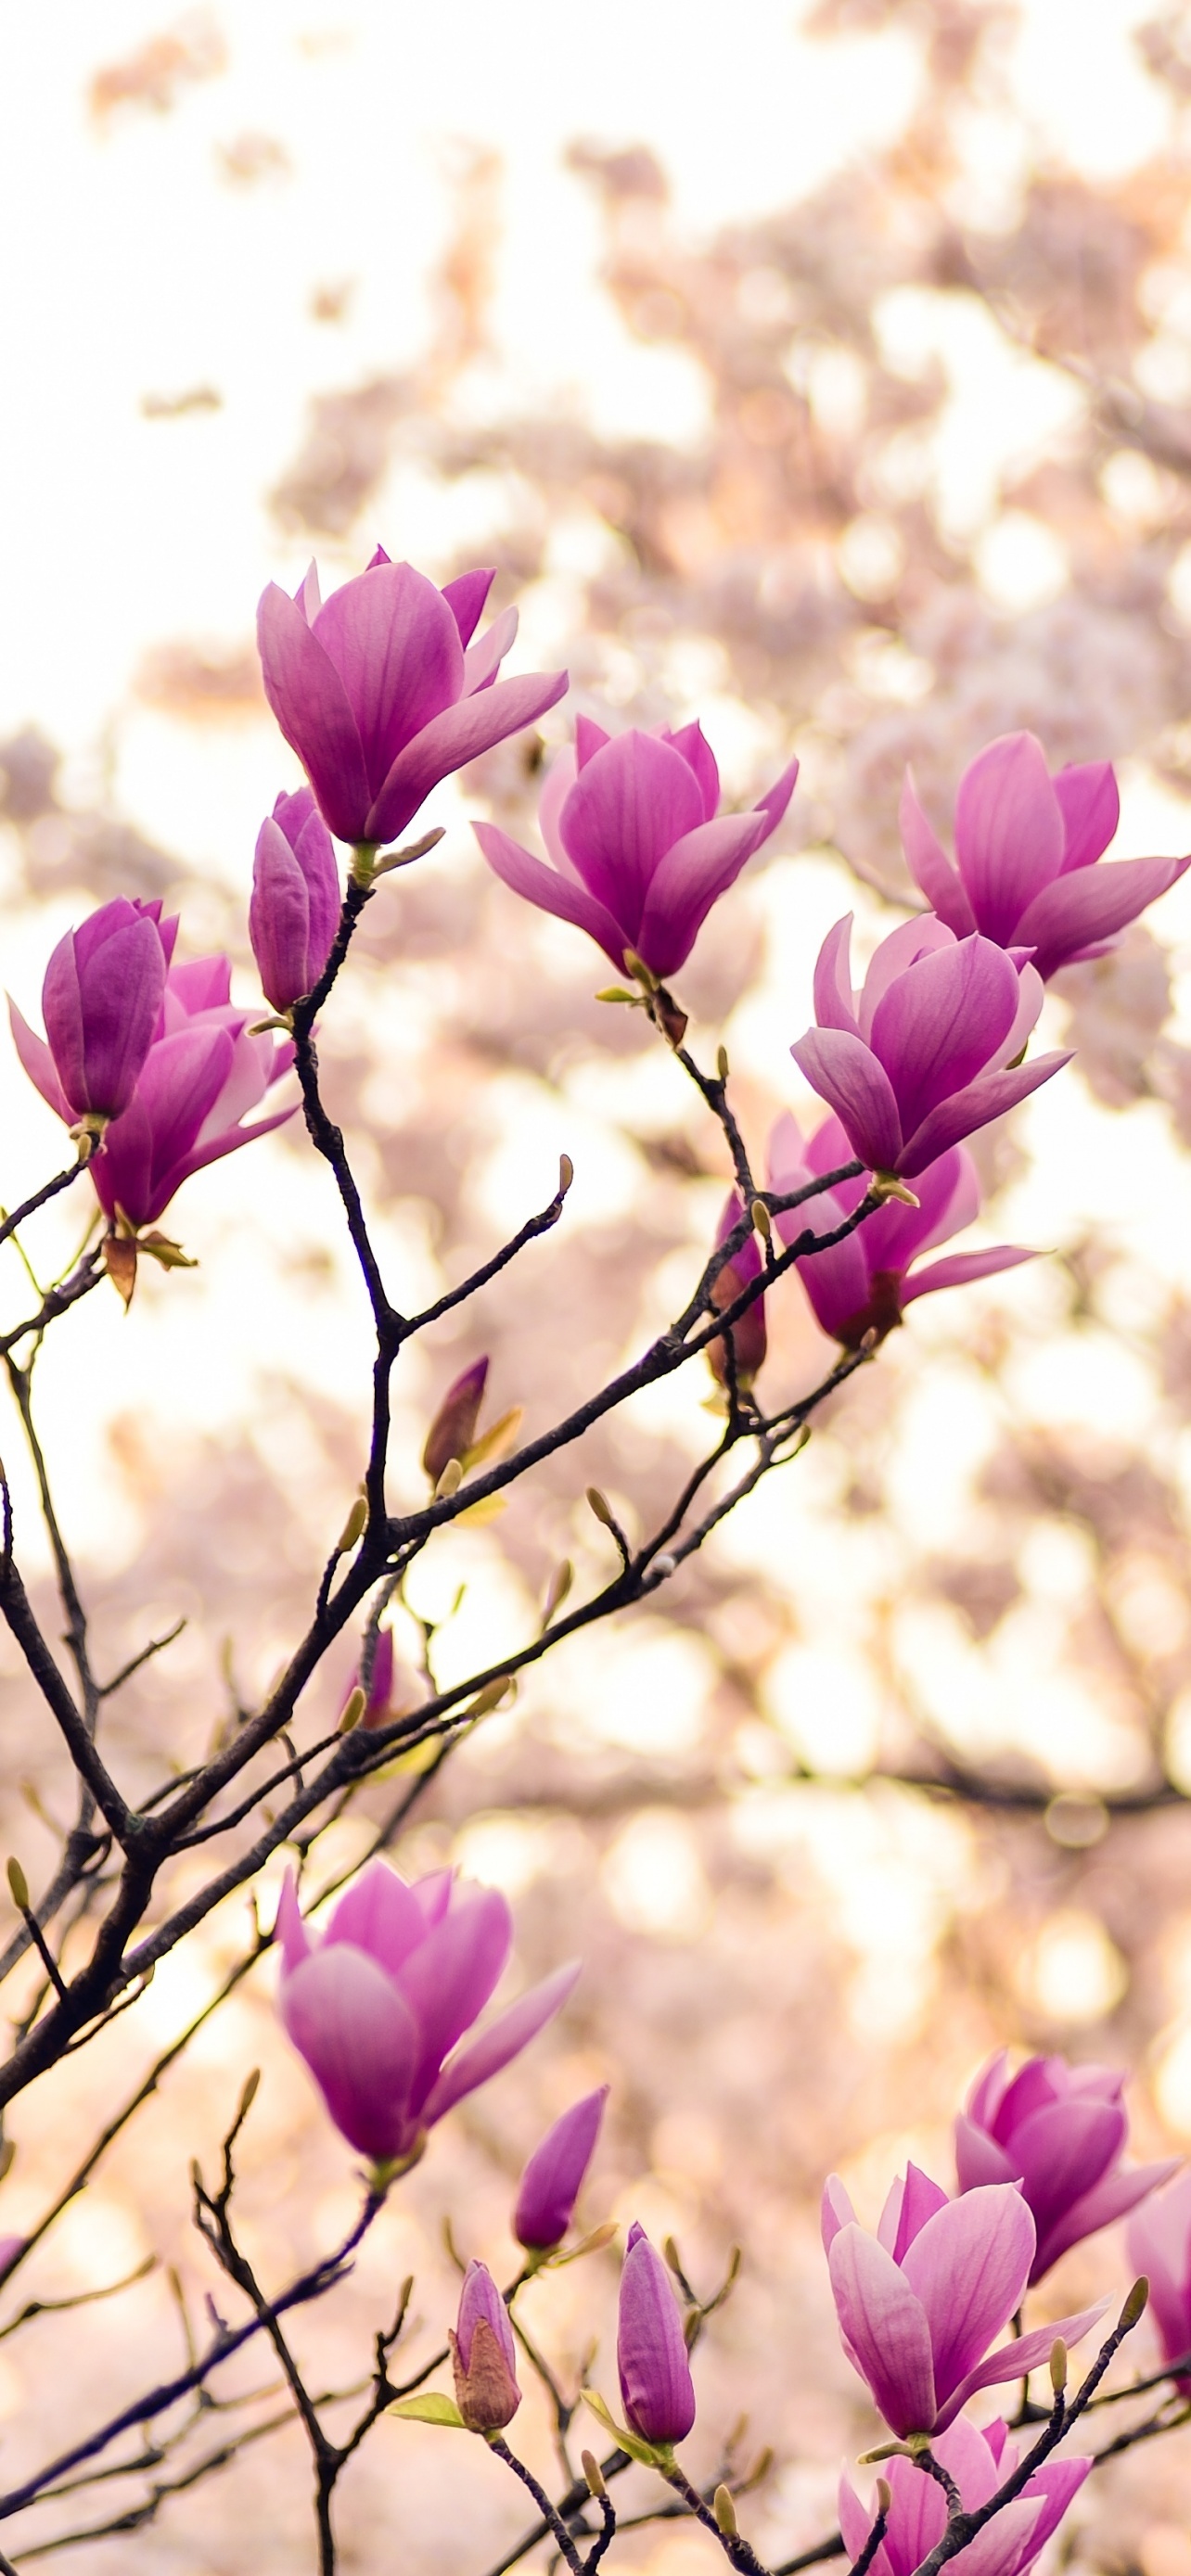 Purple magnolia blooms, Spring blossom beauty, Branches in bloom, Stunning flowers, 1290x2780 HD Handy